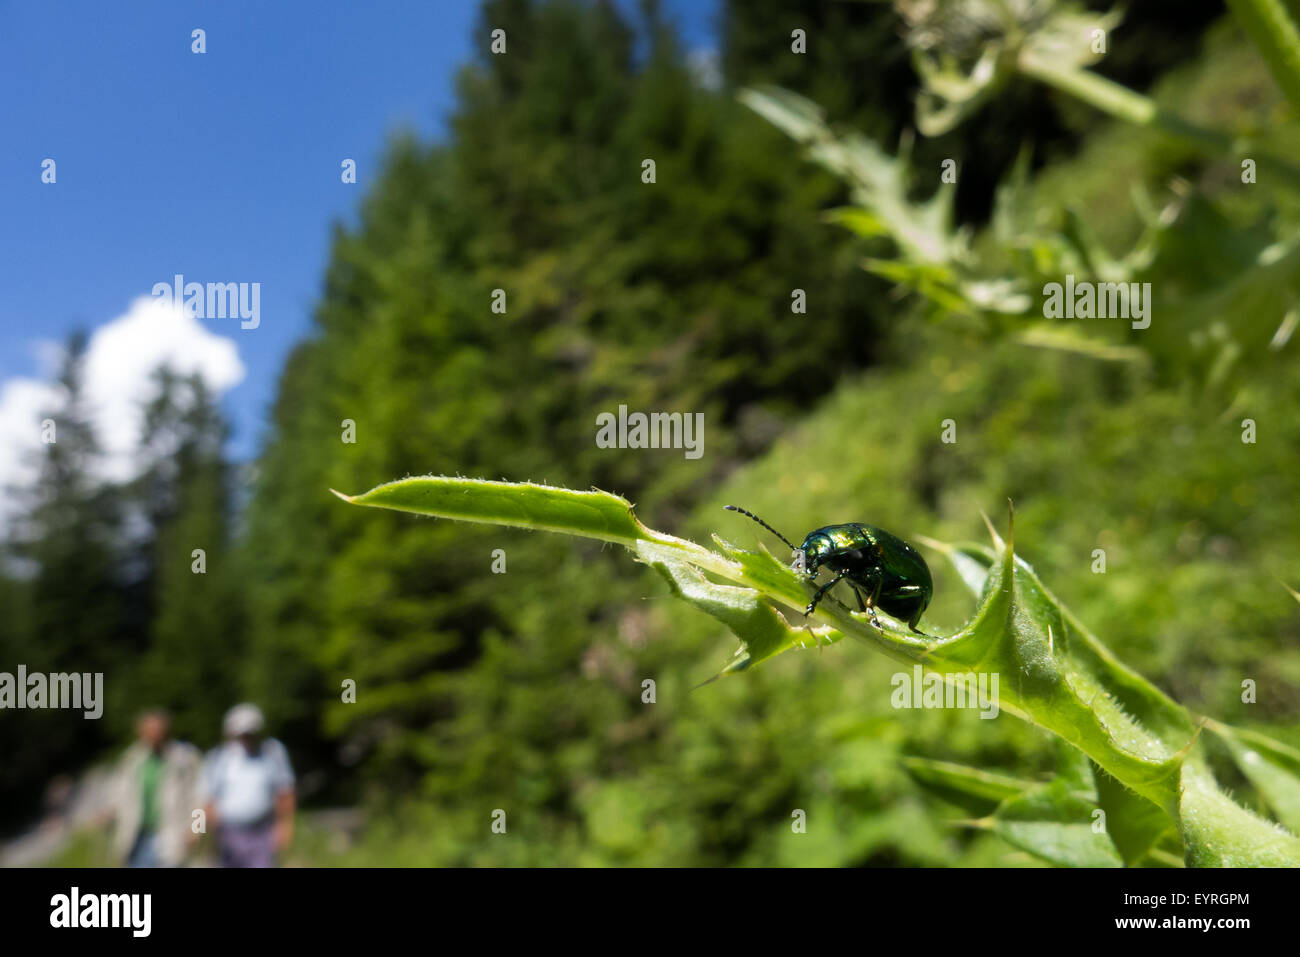 Switzerland. Shimmering green beetle on a leaf by a  mountain path with walkers. Stock Photo